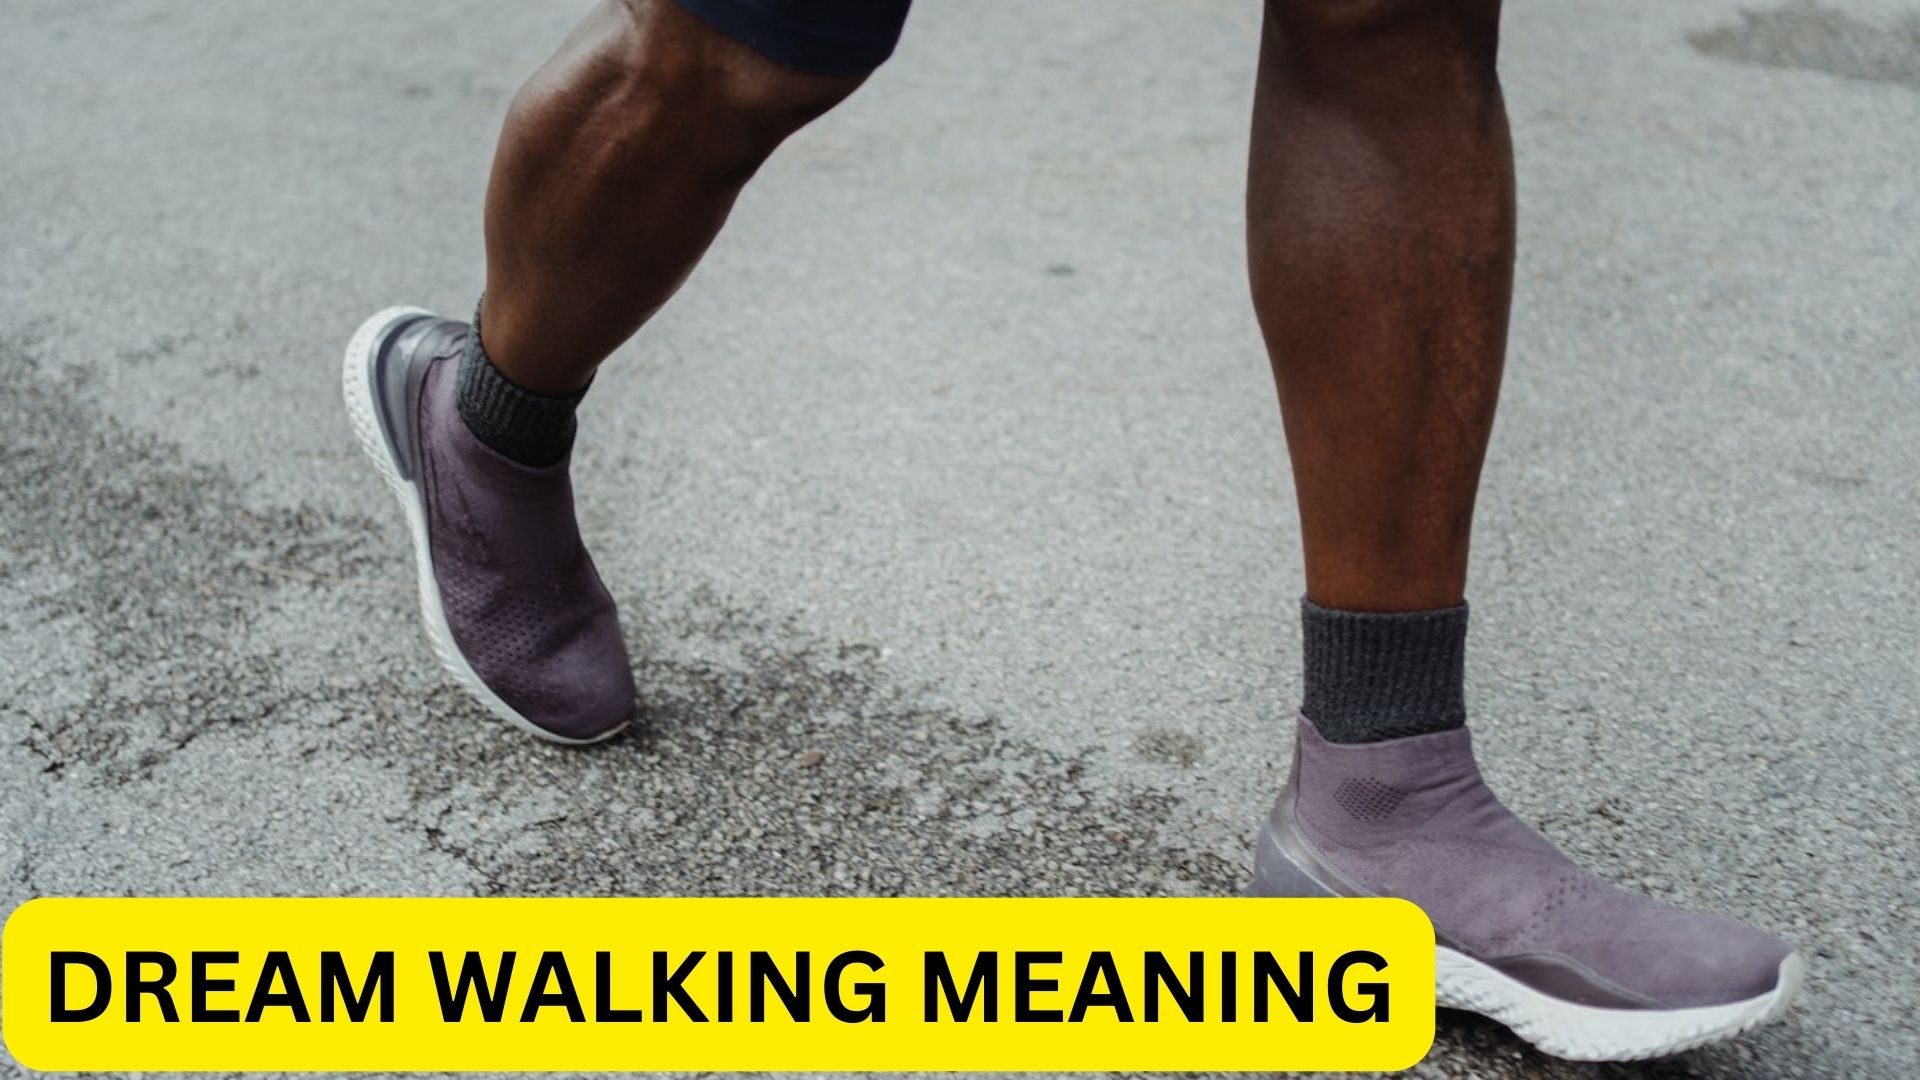 Dream Walking Meaning - Movement In Life